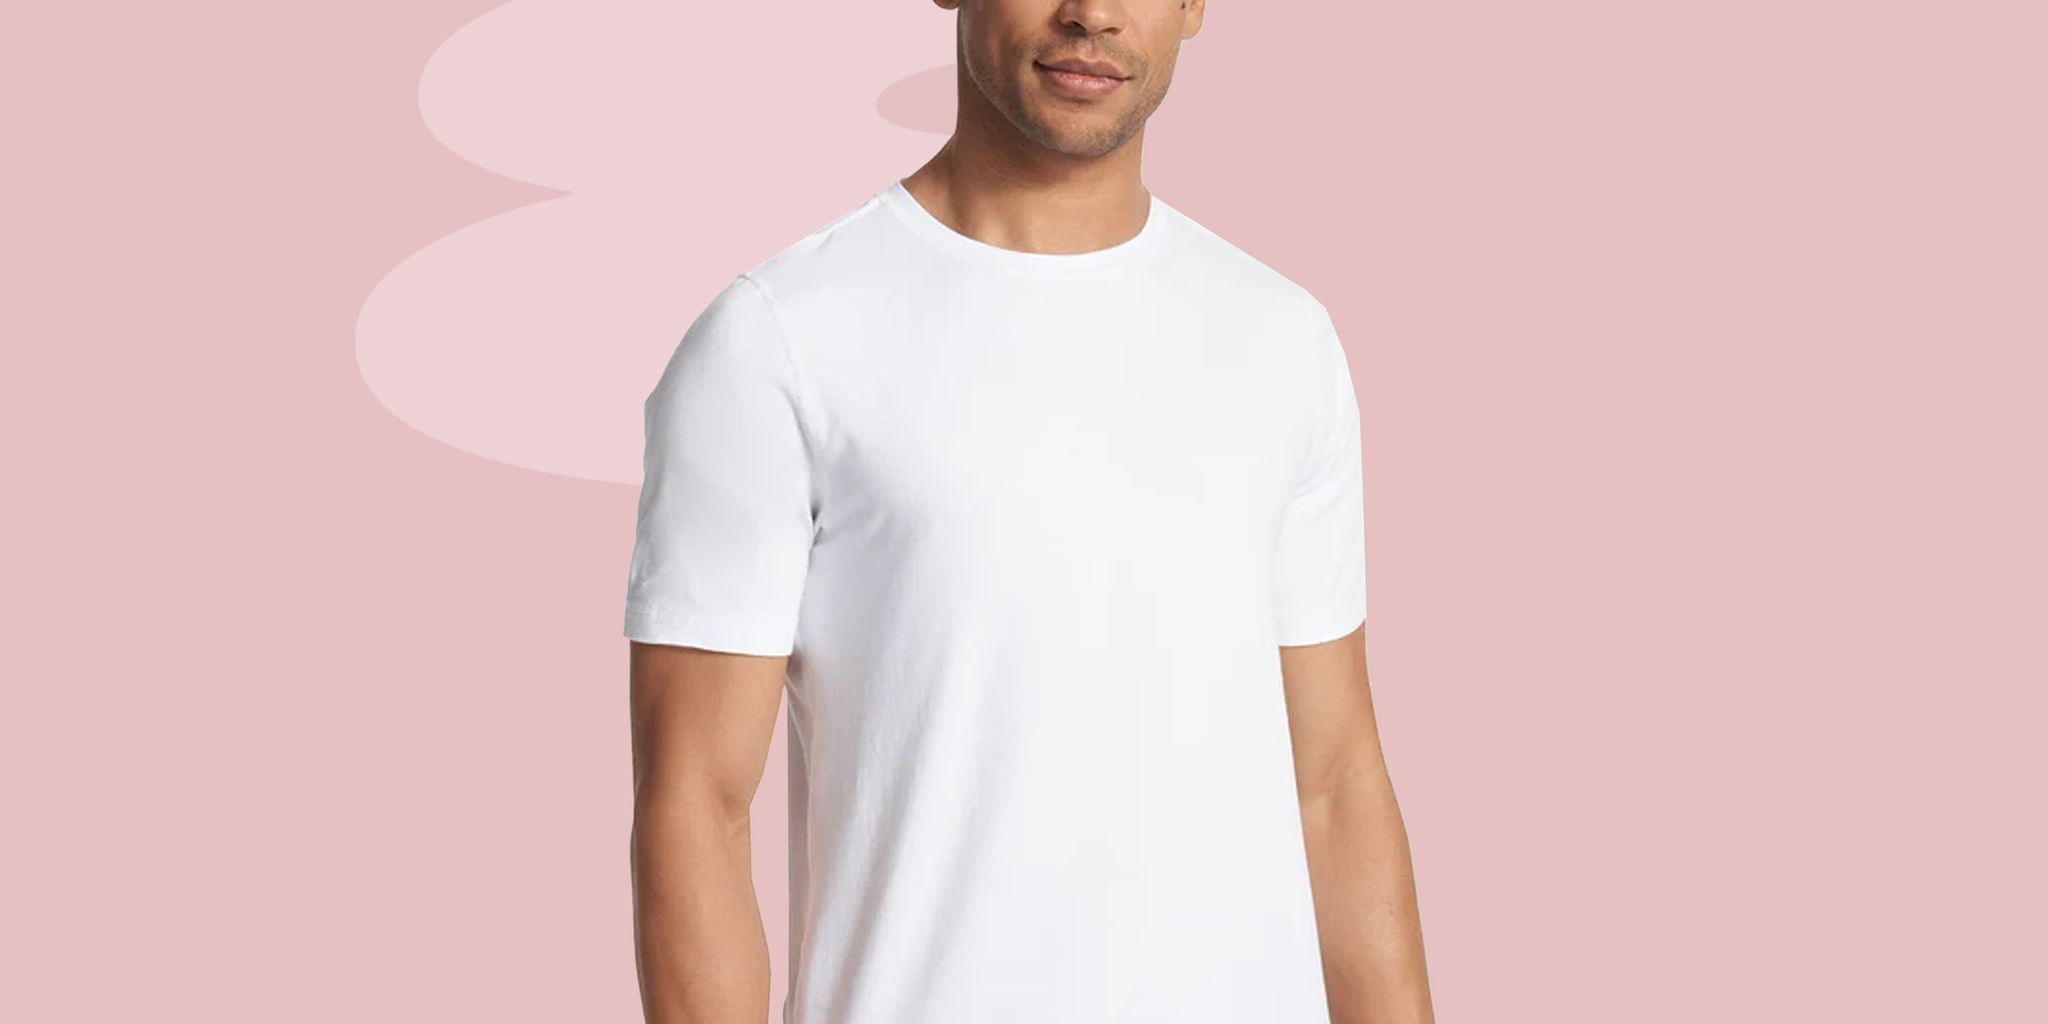 White All Yours crew-neck cotton-blend jersey T-shirt